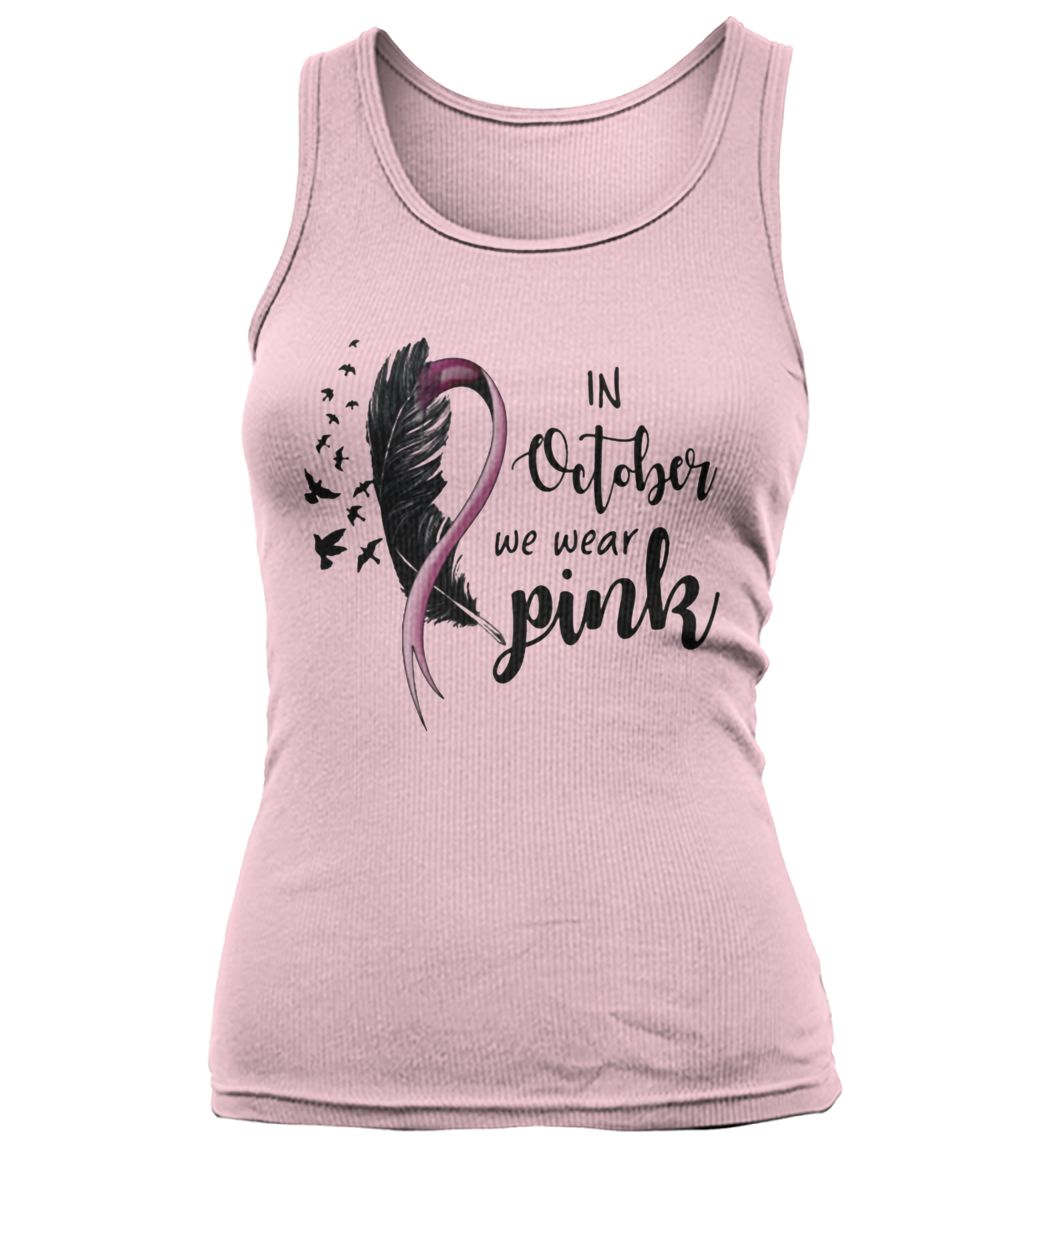 Breast cancer in october we wear pink women's tank top